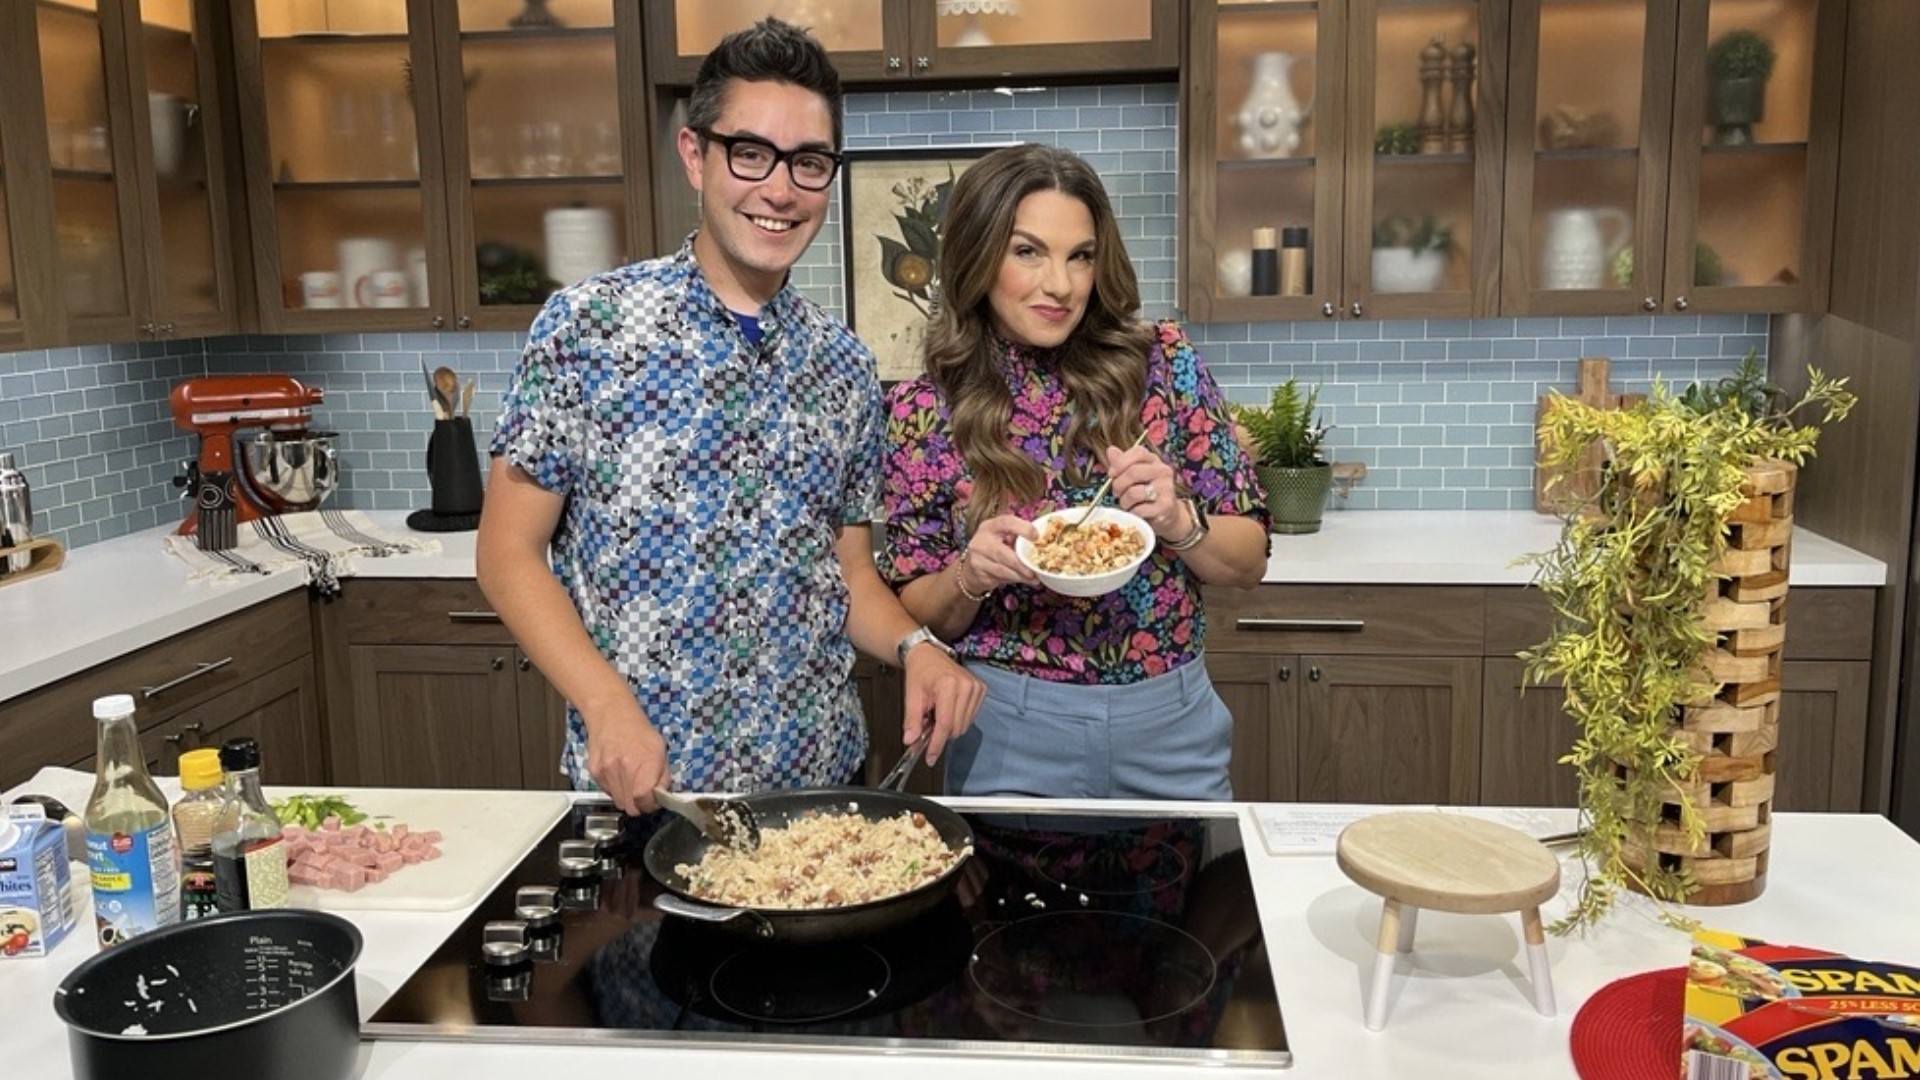 Executive Producer Joseph Suttner shows off his favorite easy weeknight dinner that's ready in minutes!